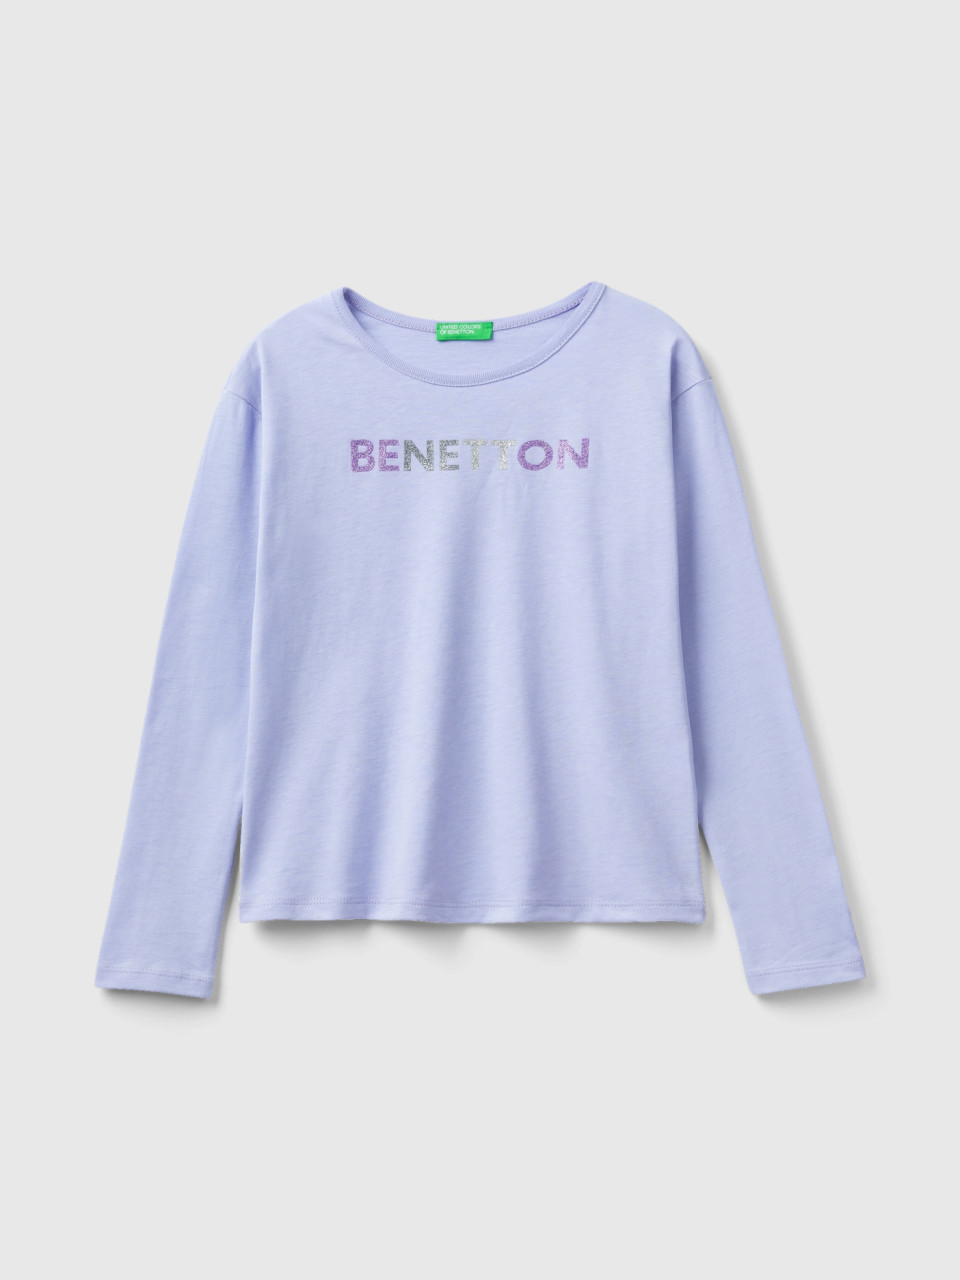 Benetton, T-shirt In Warm Organic Cotton With Glitter, Lilac, Kids